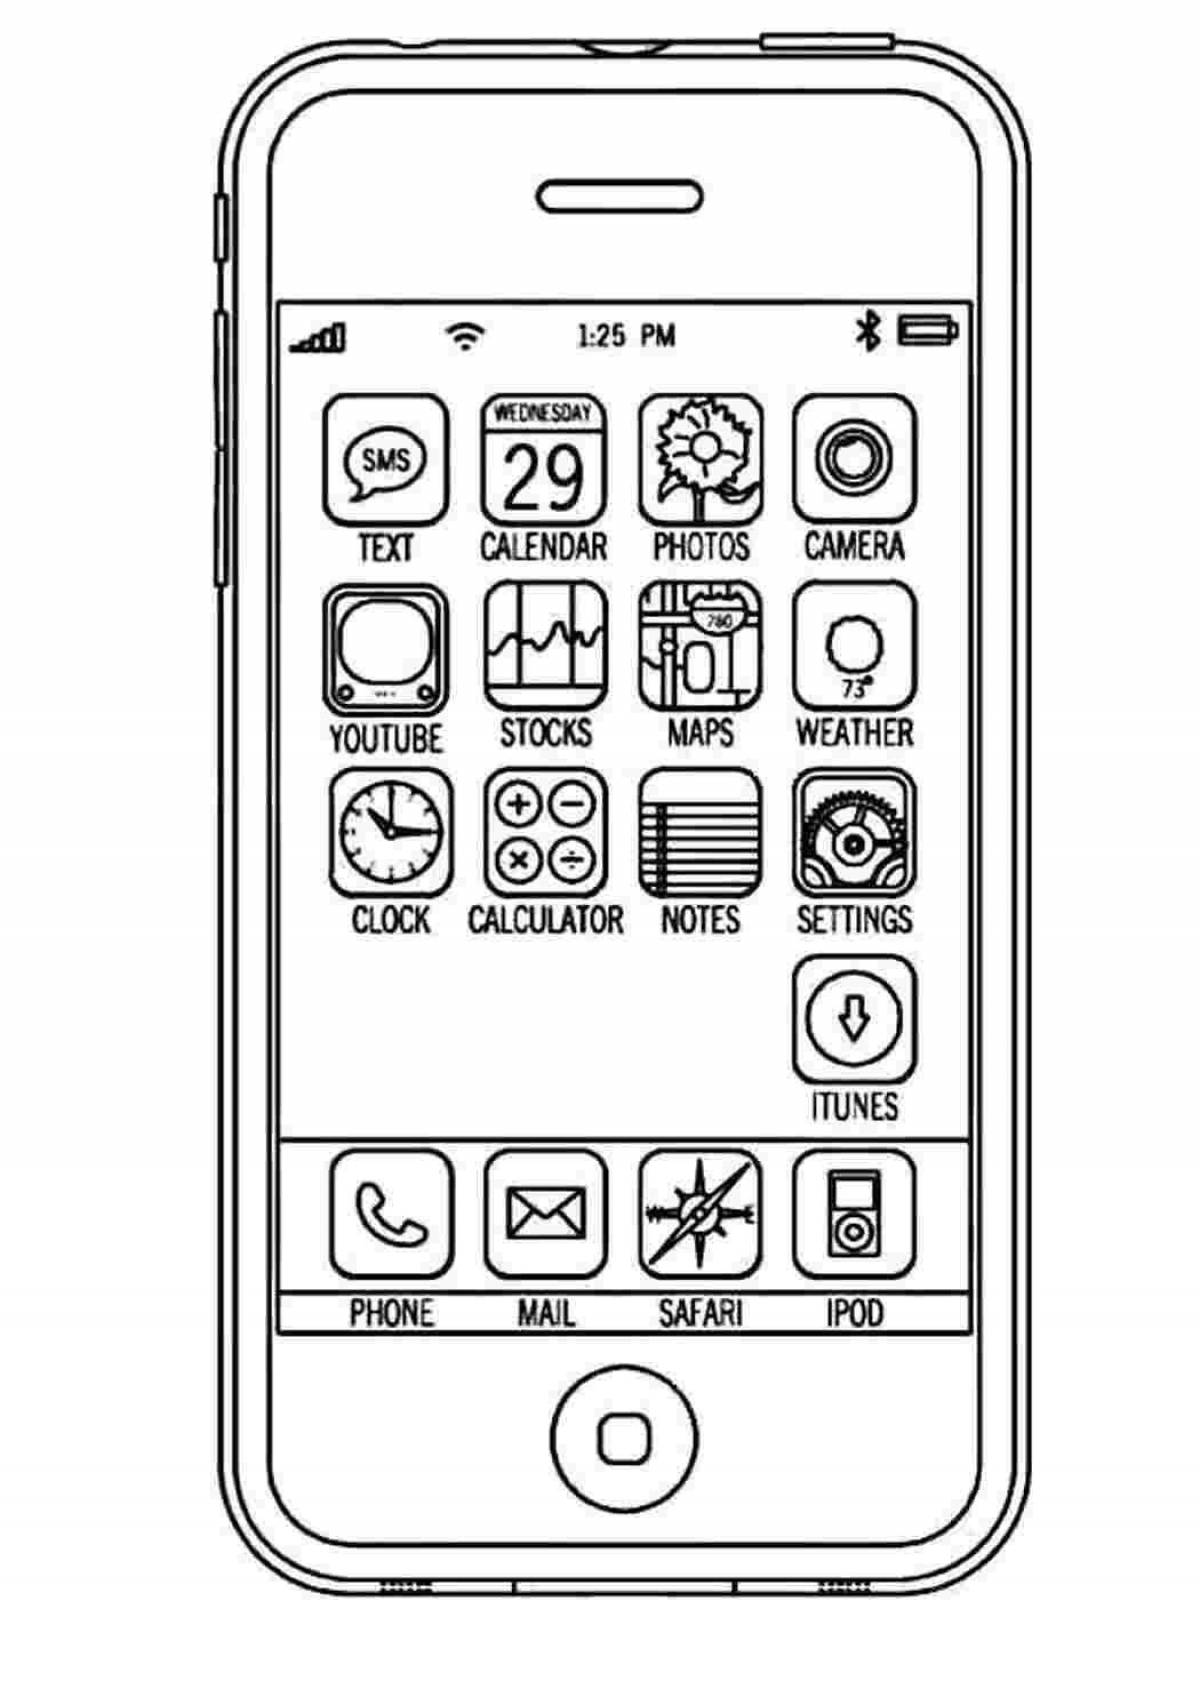 Samsung intriguing coloring book